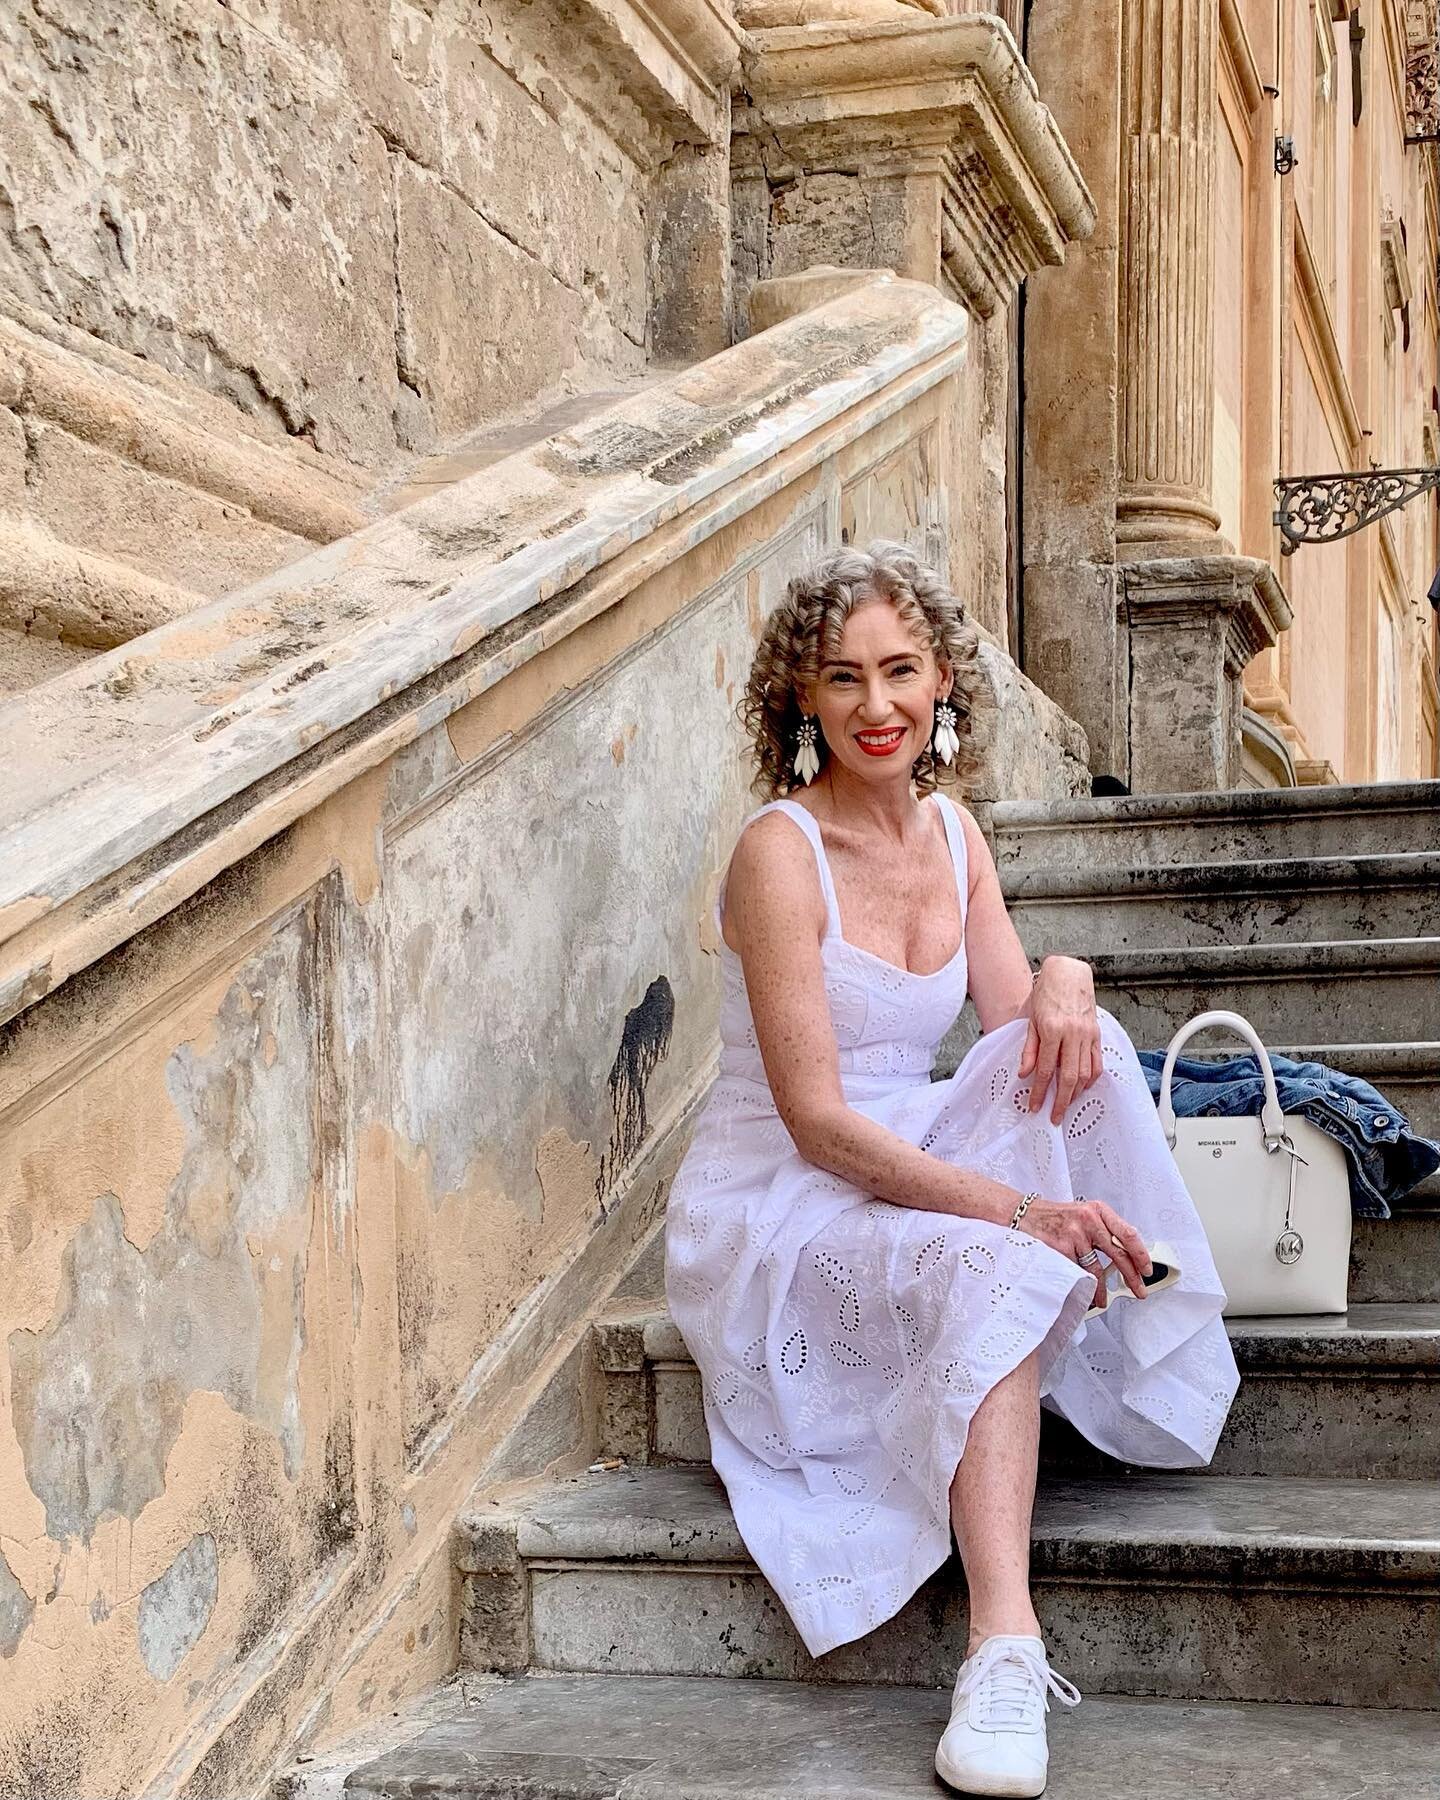 Fairytale 50th! 💃🏻 Prepare for the photobombing of my Postcards from Palermo! 🇮🇹🥂💃🏻 

Thank you for making it more special than I could ever have imagined&hellip; #ifyouknowyouknow 💋

#palermosicily #thisisfifty #birthdaygirl #stylishtravel #